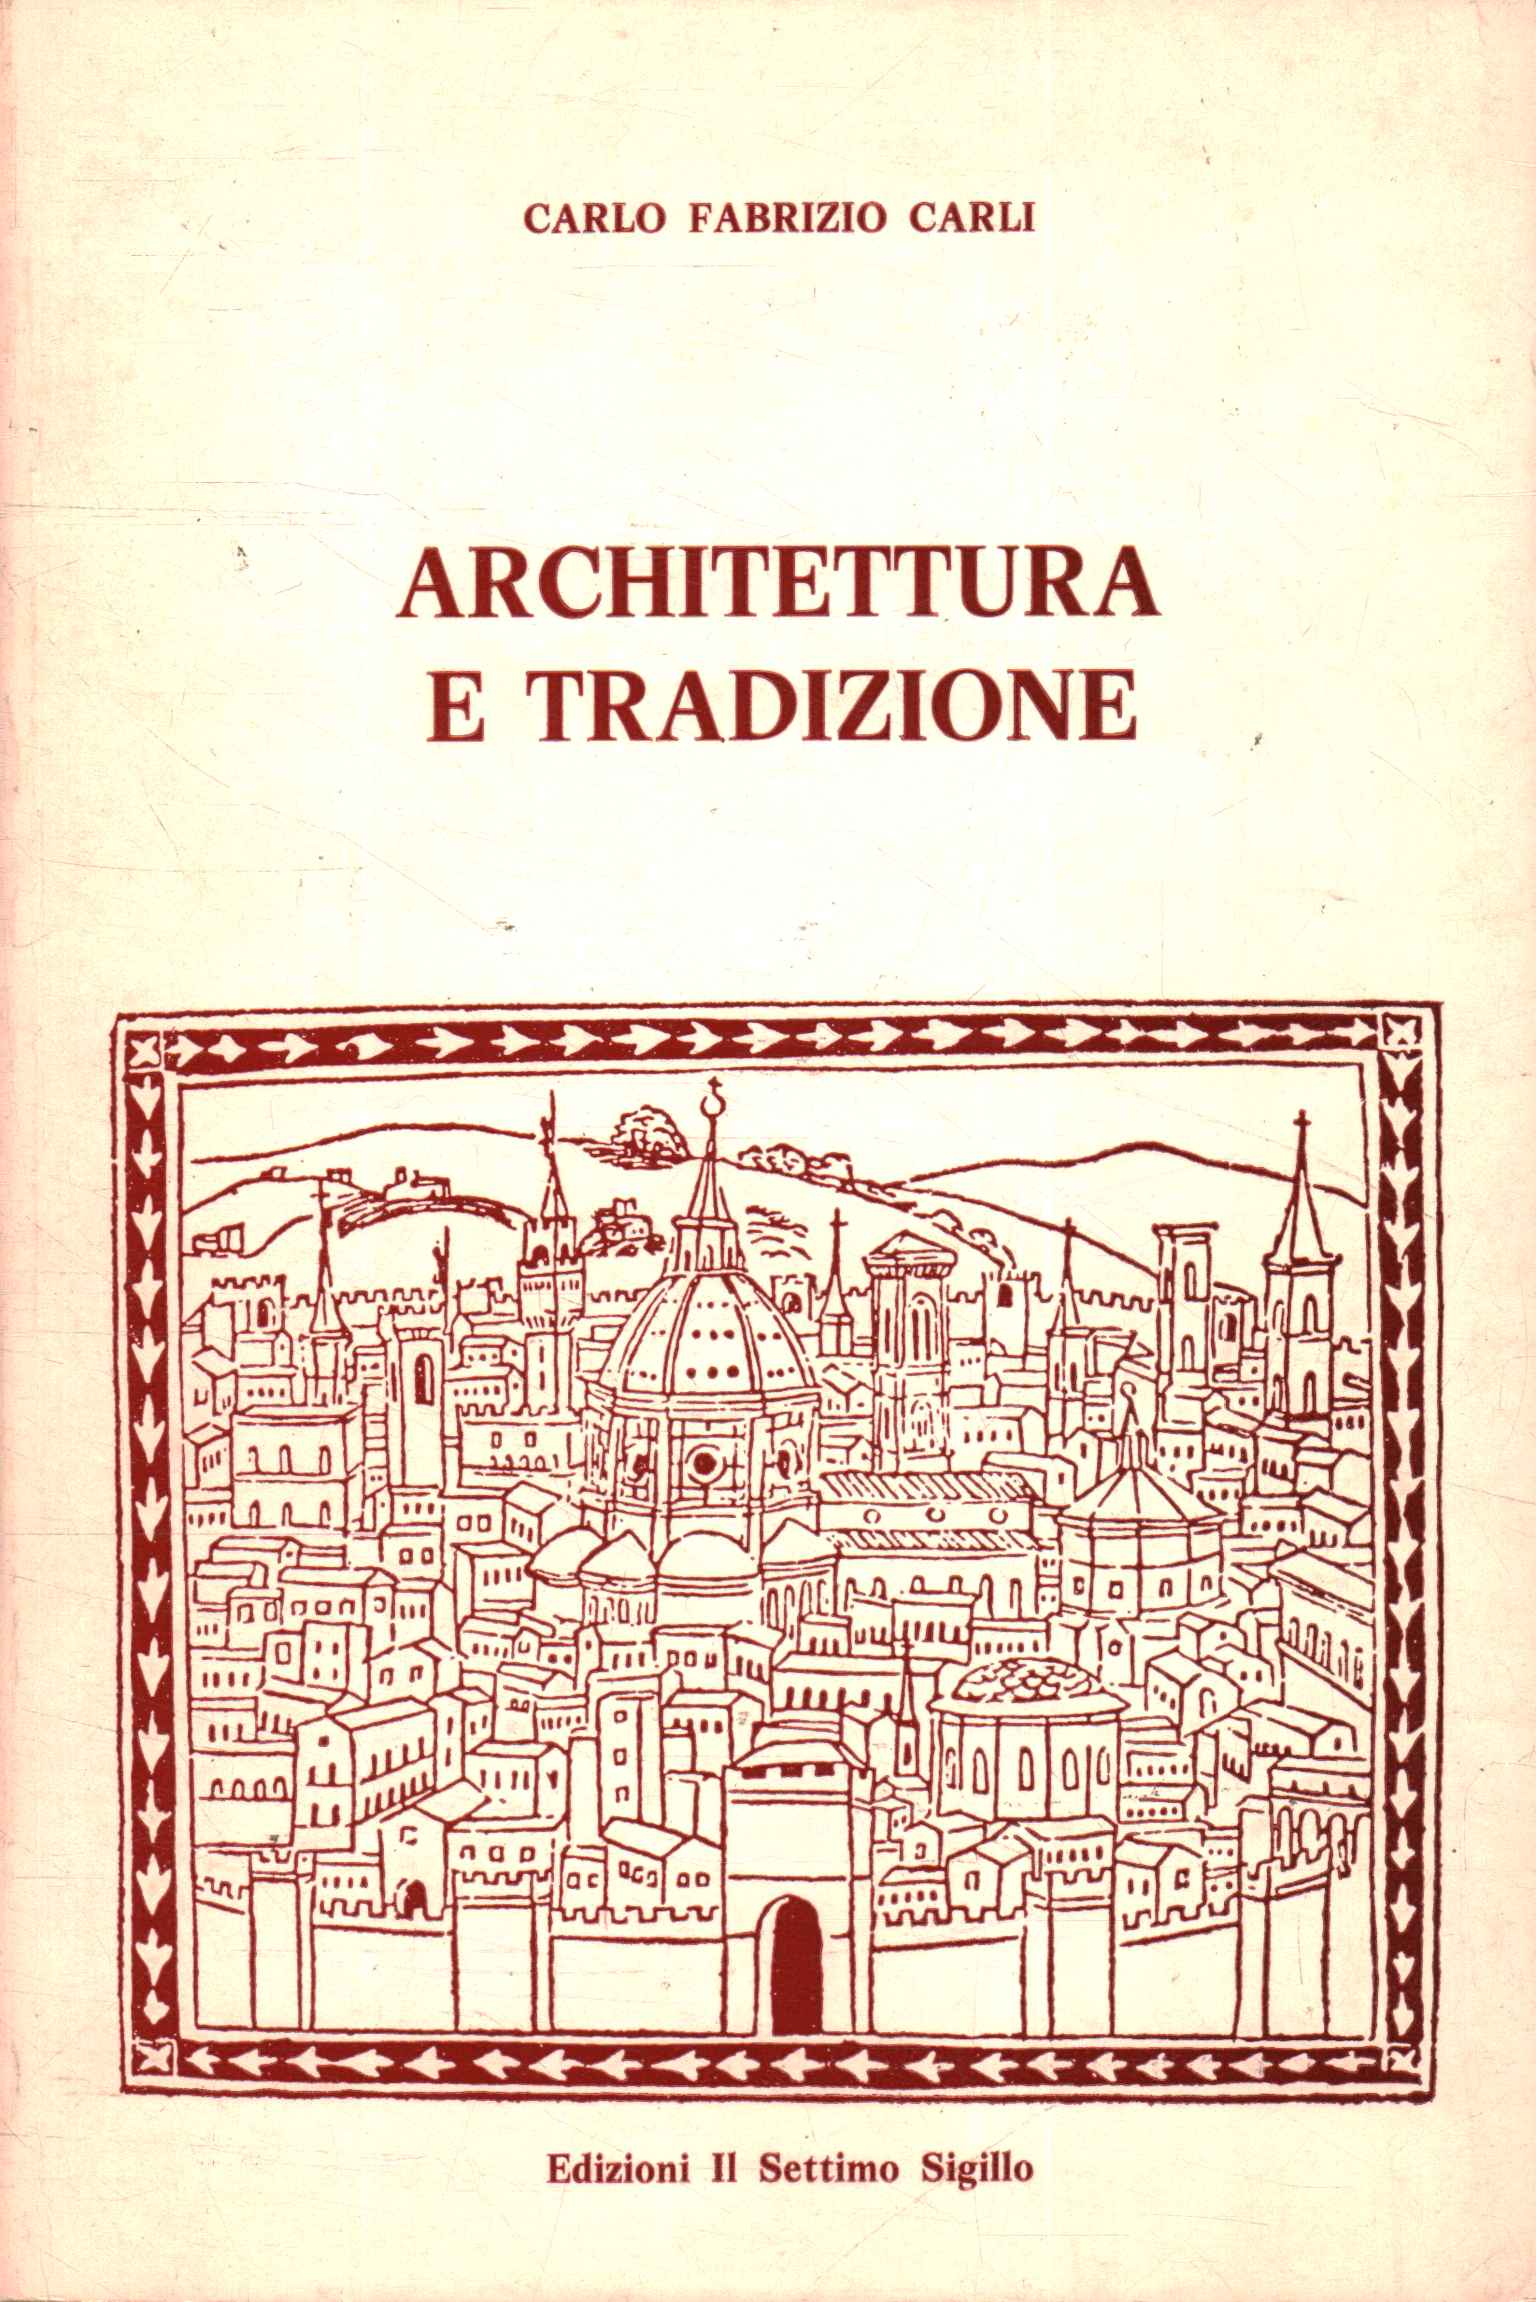 Architecture and tradition